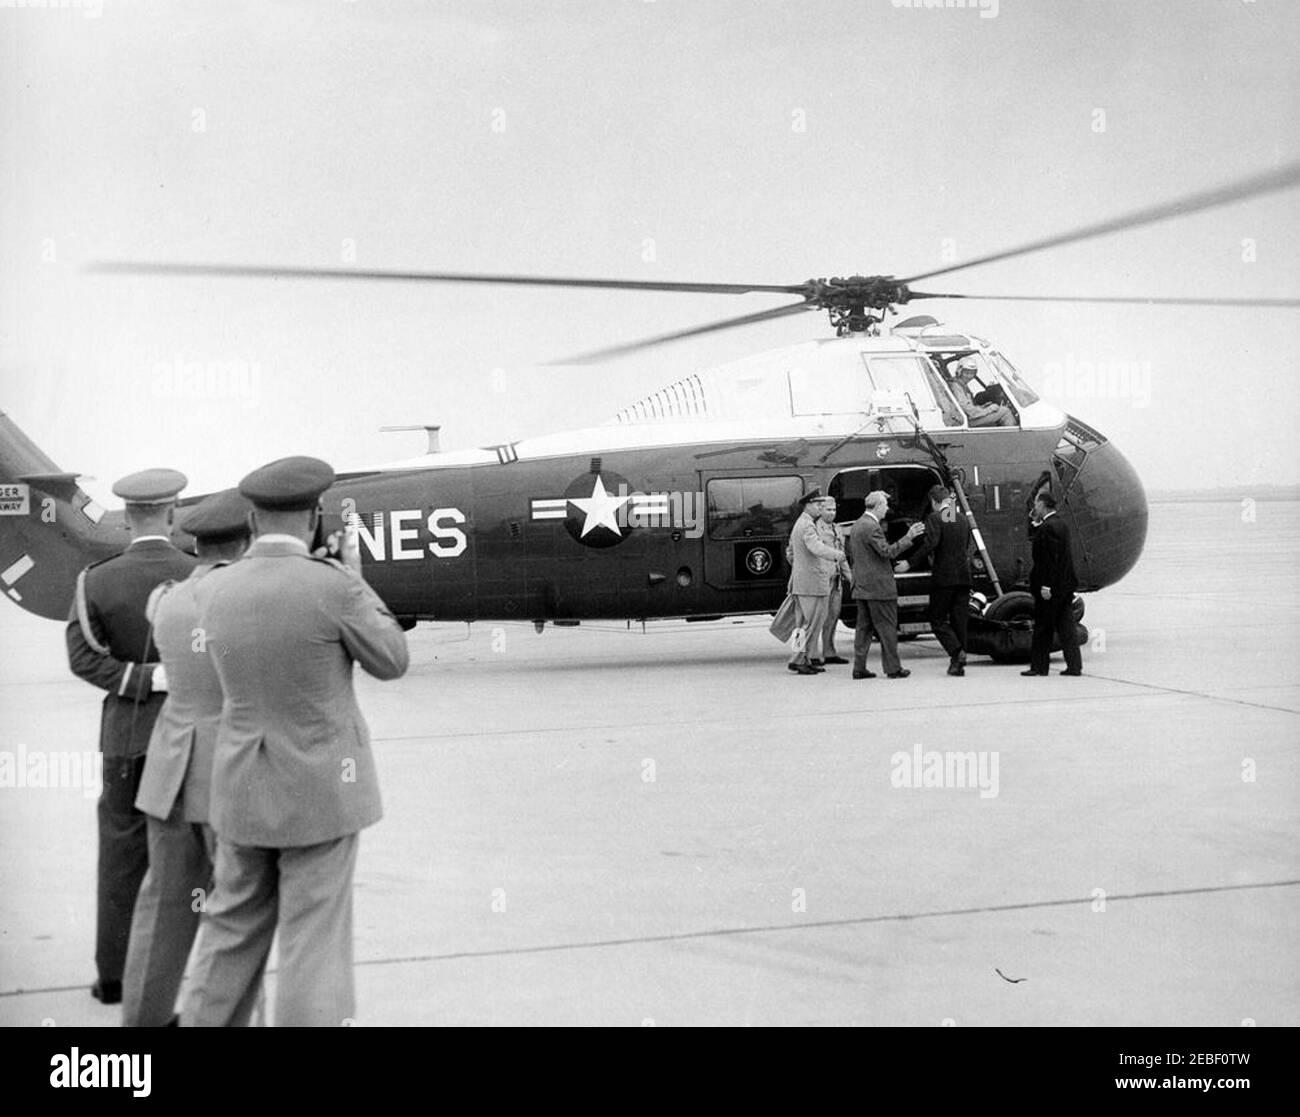 Arrival of President Kennedy at Andrews Air Force Base upon his return from Europe, 9:30AM. Arrival of President John F. Kennedy at Andrews Air Force Base in Maryland upon his return from Europe. At the United States Marine Corps helicopter (L-R): Military Aide to the President, General Chester V. Clifton; an unidentified man; Senator Everett Dirksen (Illinois); President Kennedy; an unidentified man. In the foreground are various members of the United States military. Stock Photo